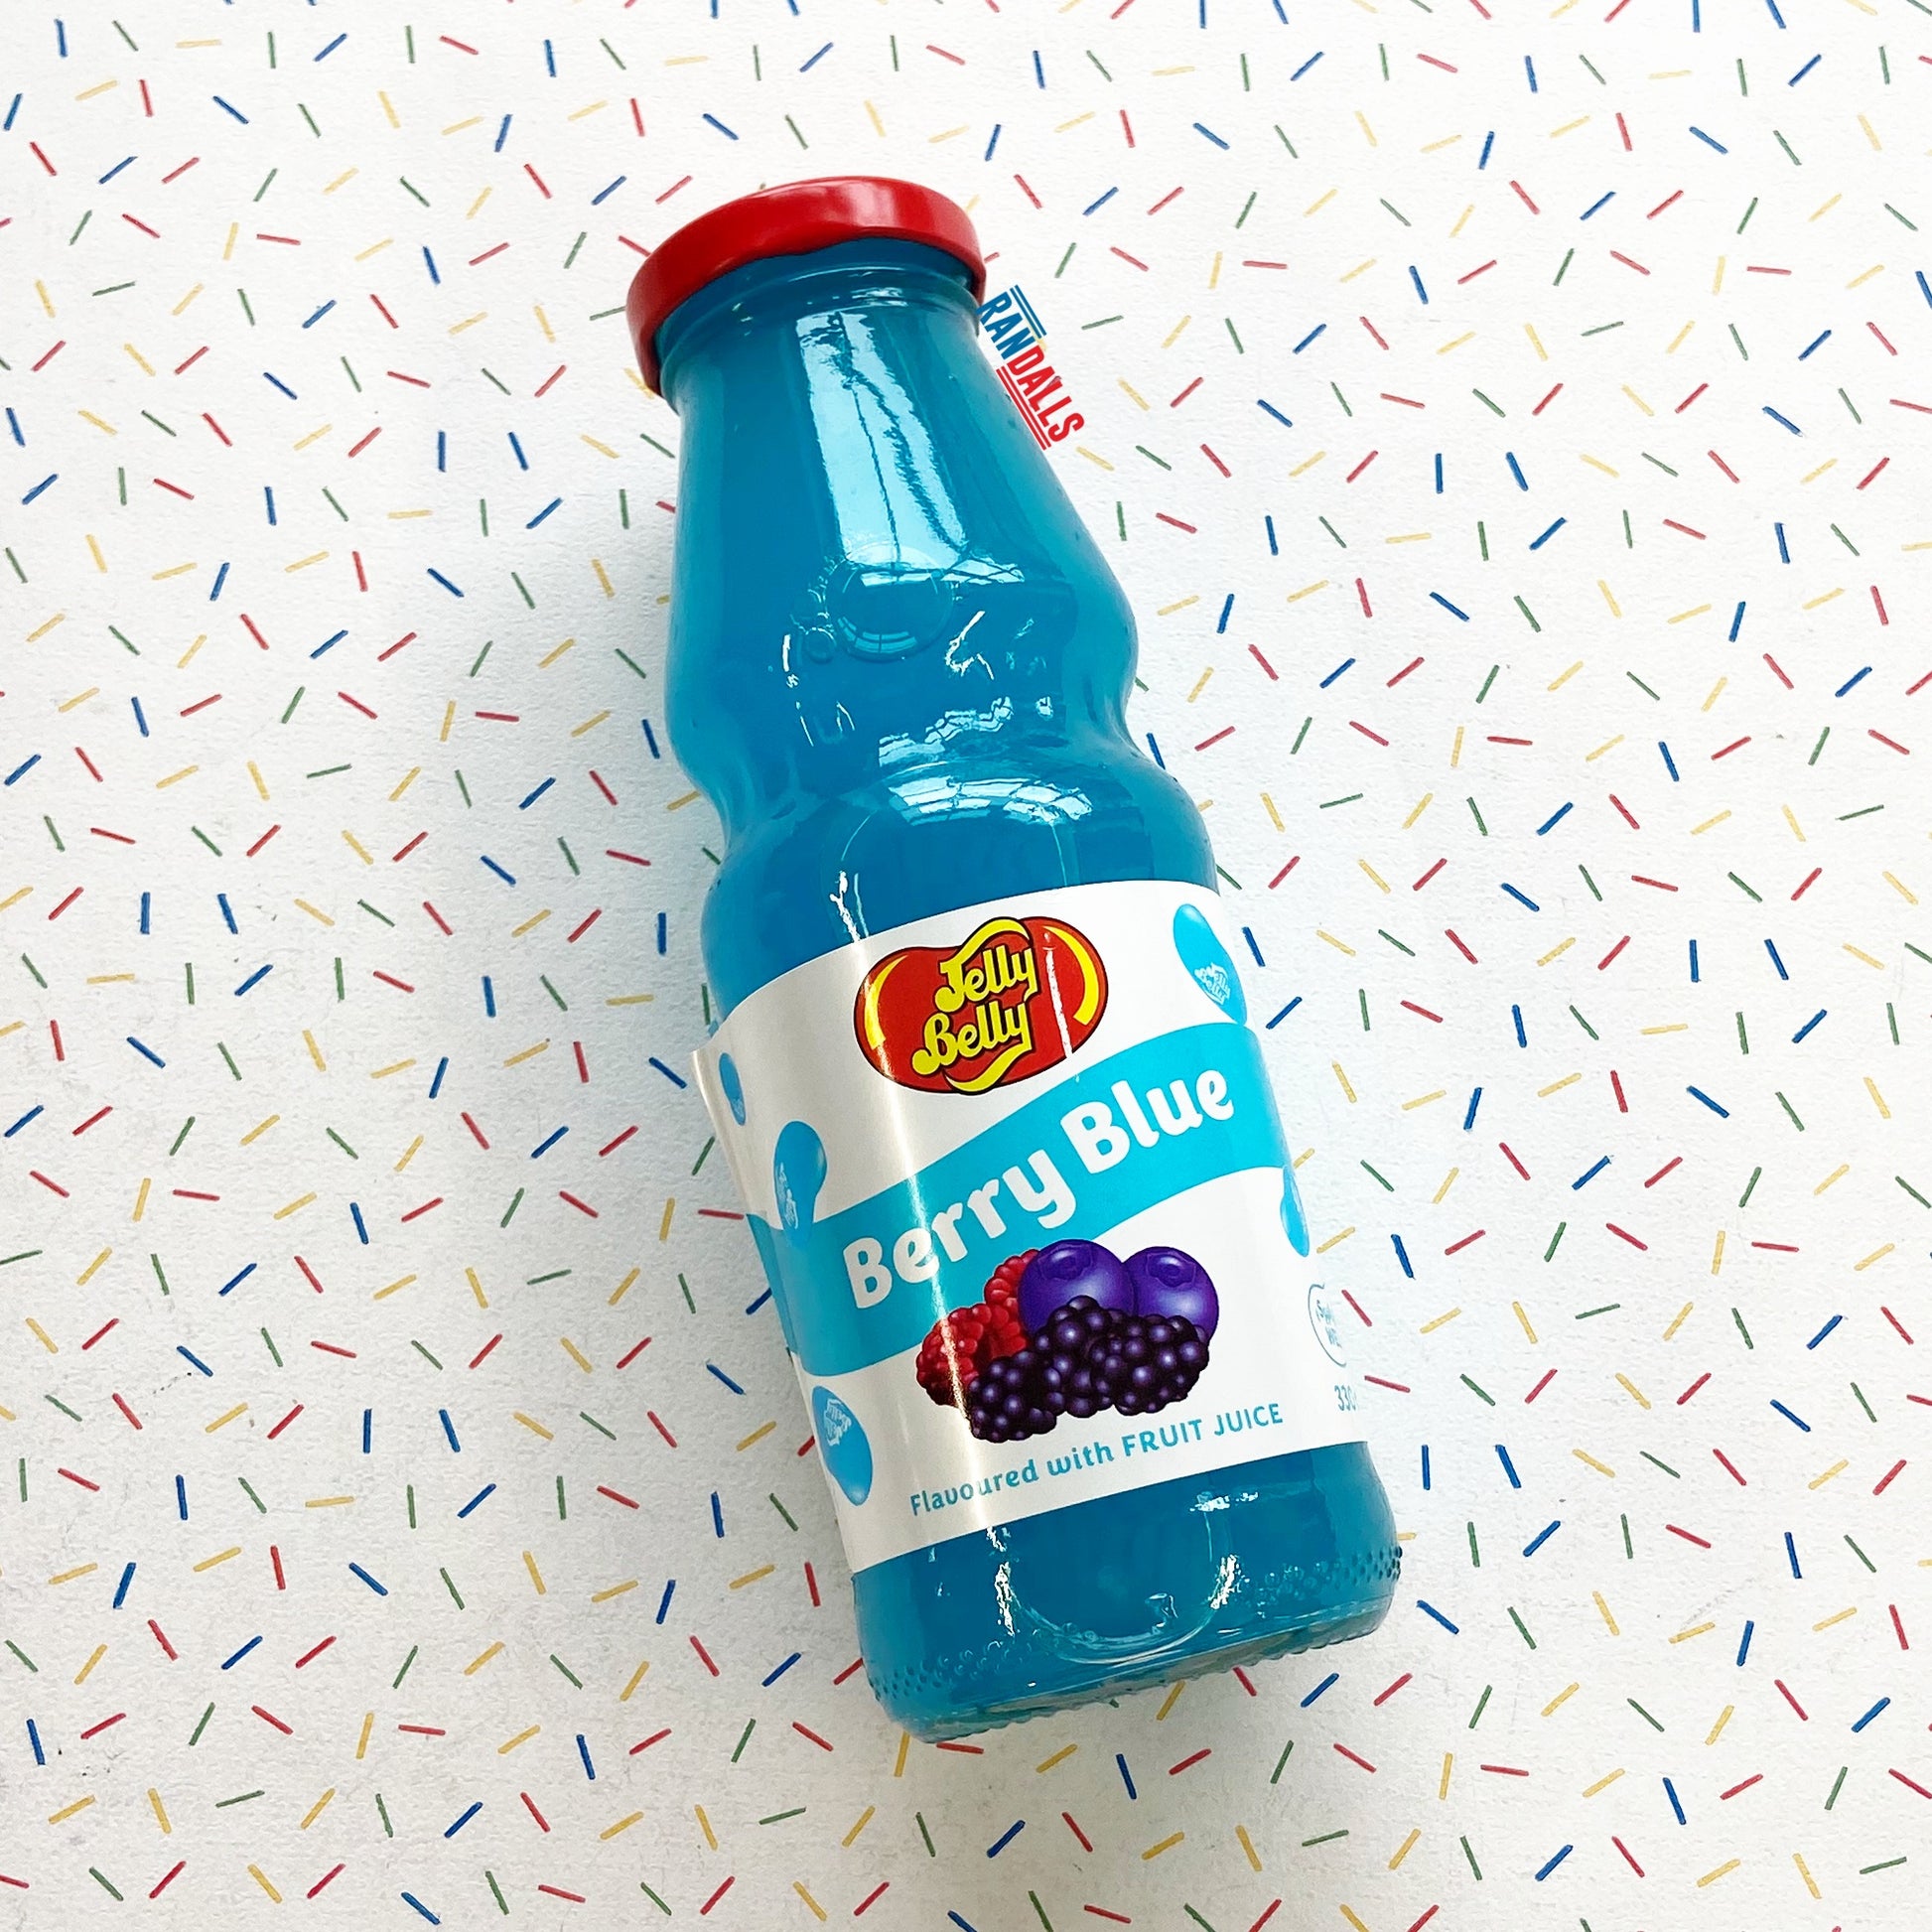 jelly belly, jelly belly drink, berry blue, soda, american soda, berry blue drink, usa, randalls,